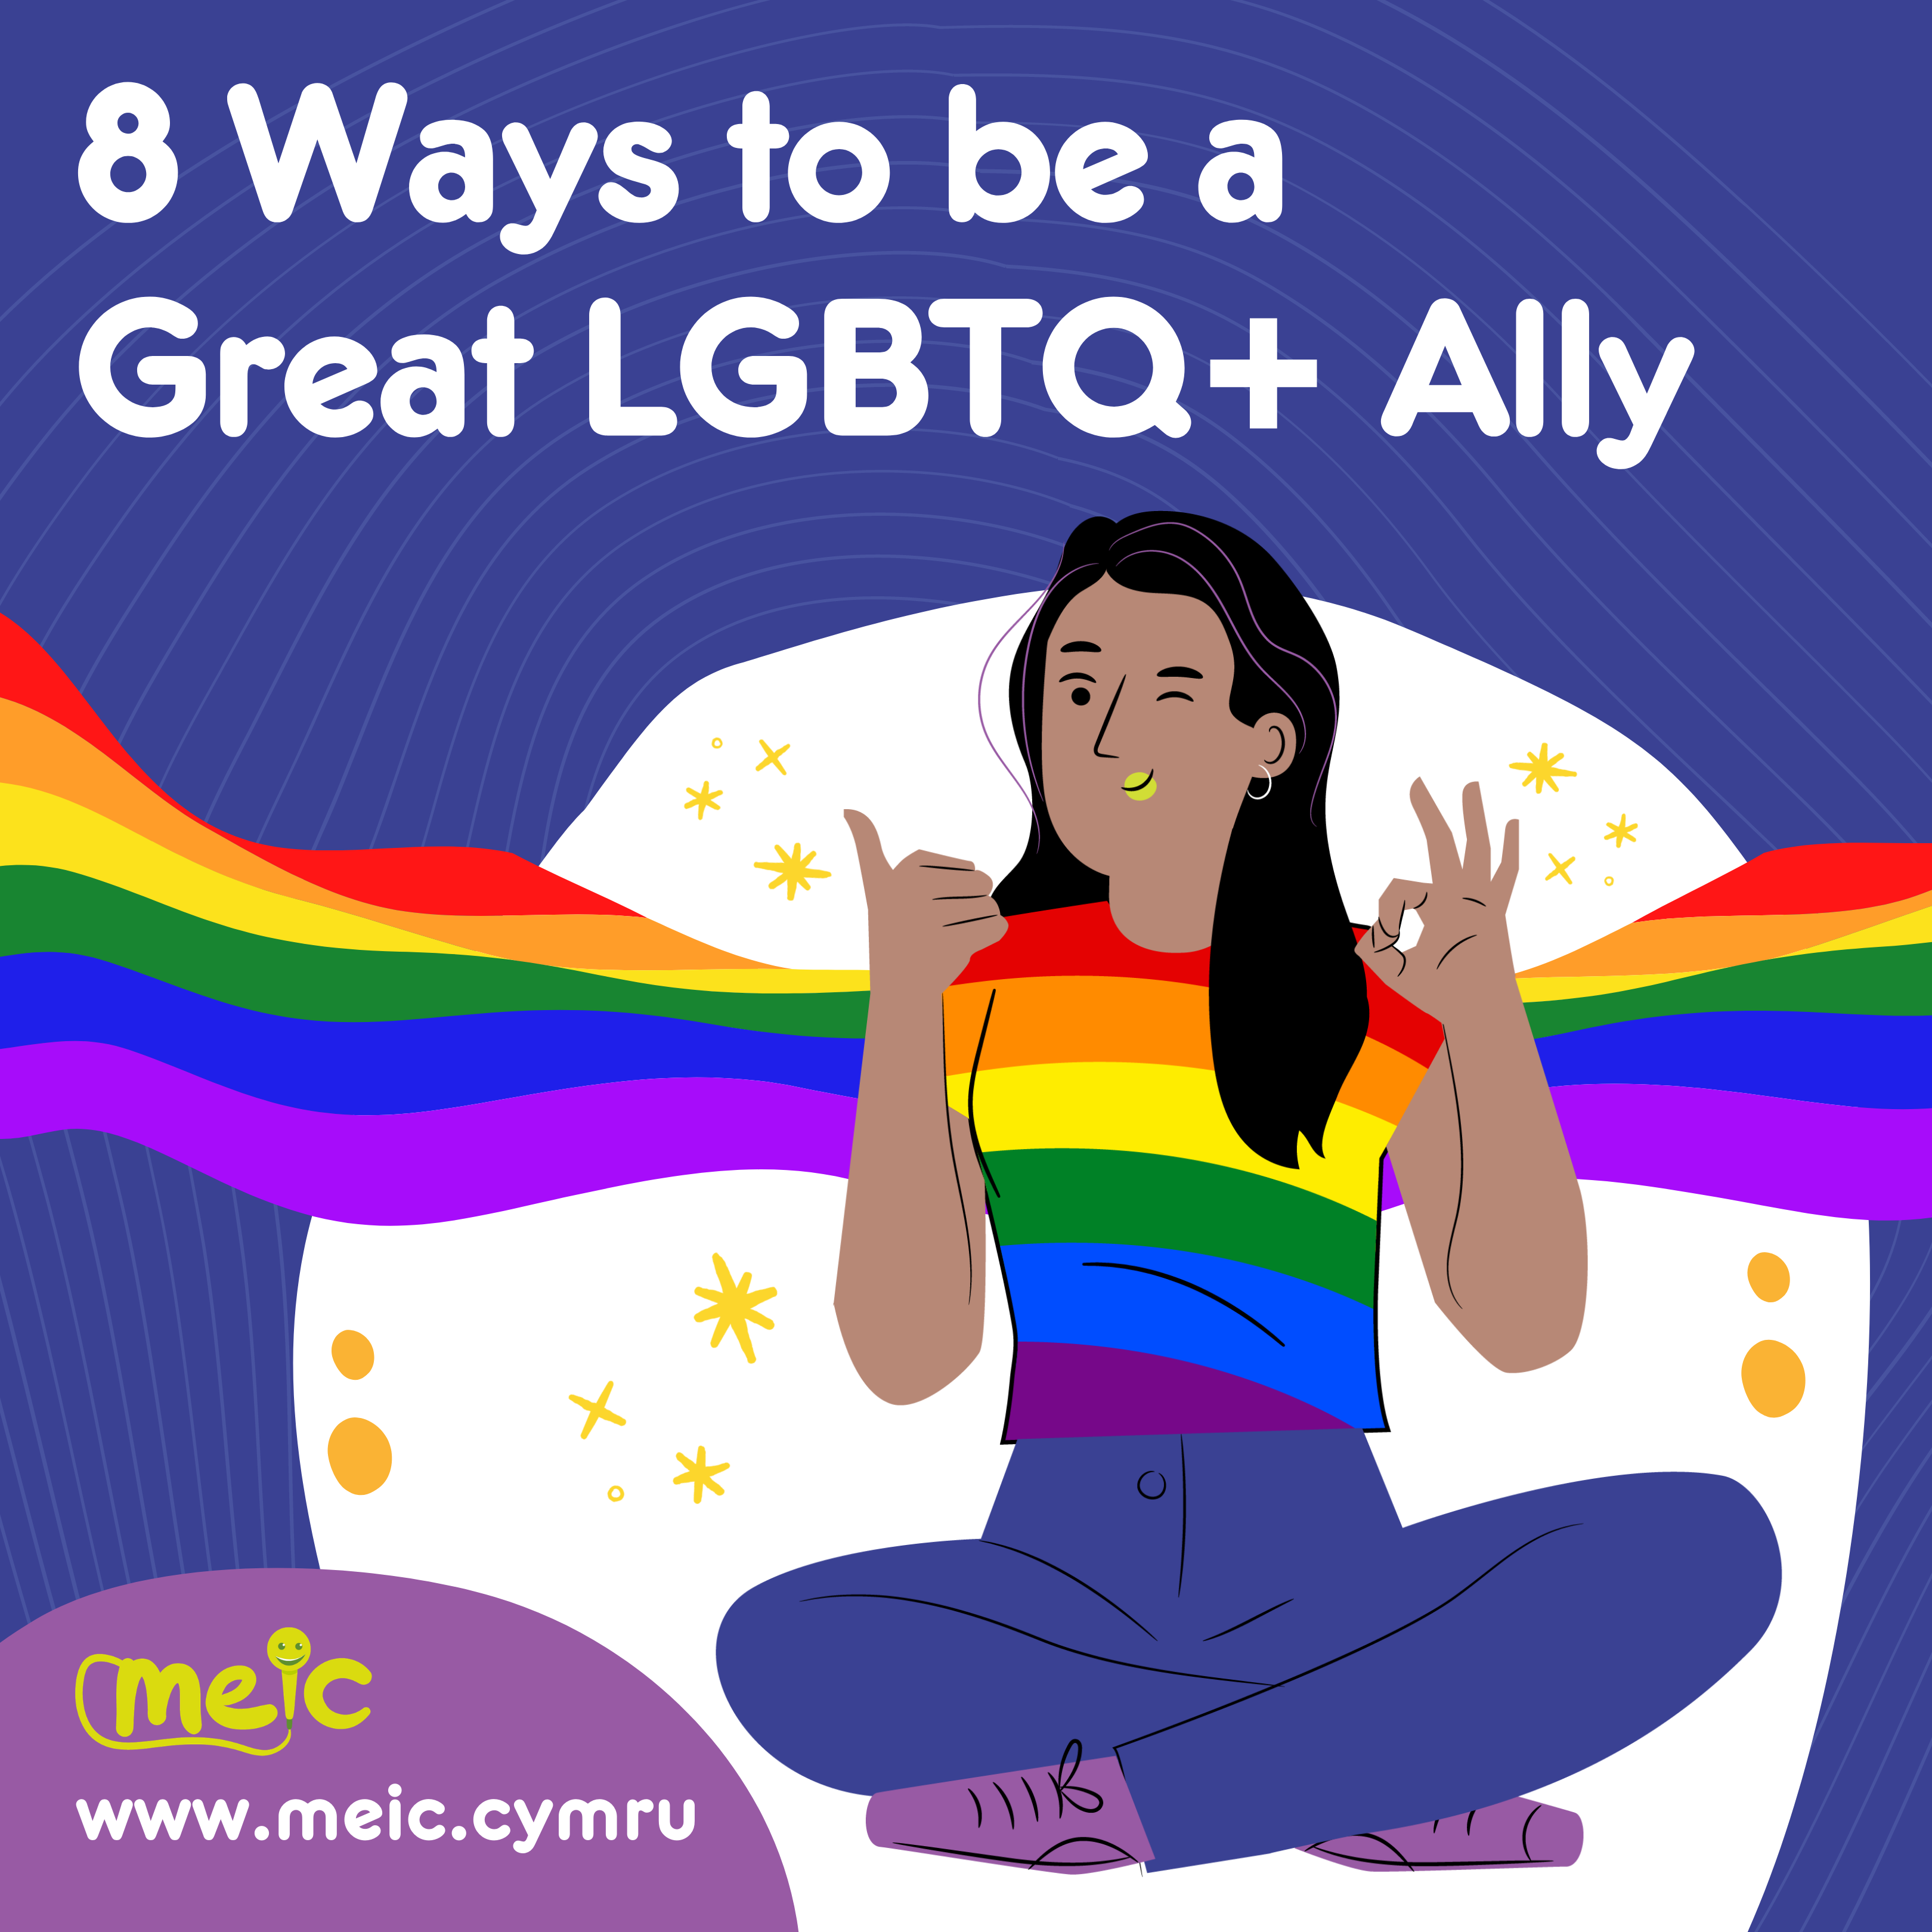 Your Rainbow Logo Doesn't Make You an Ally